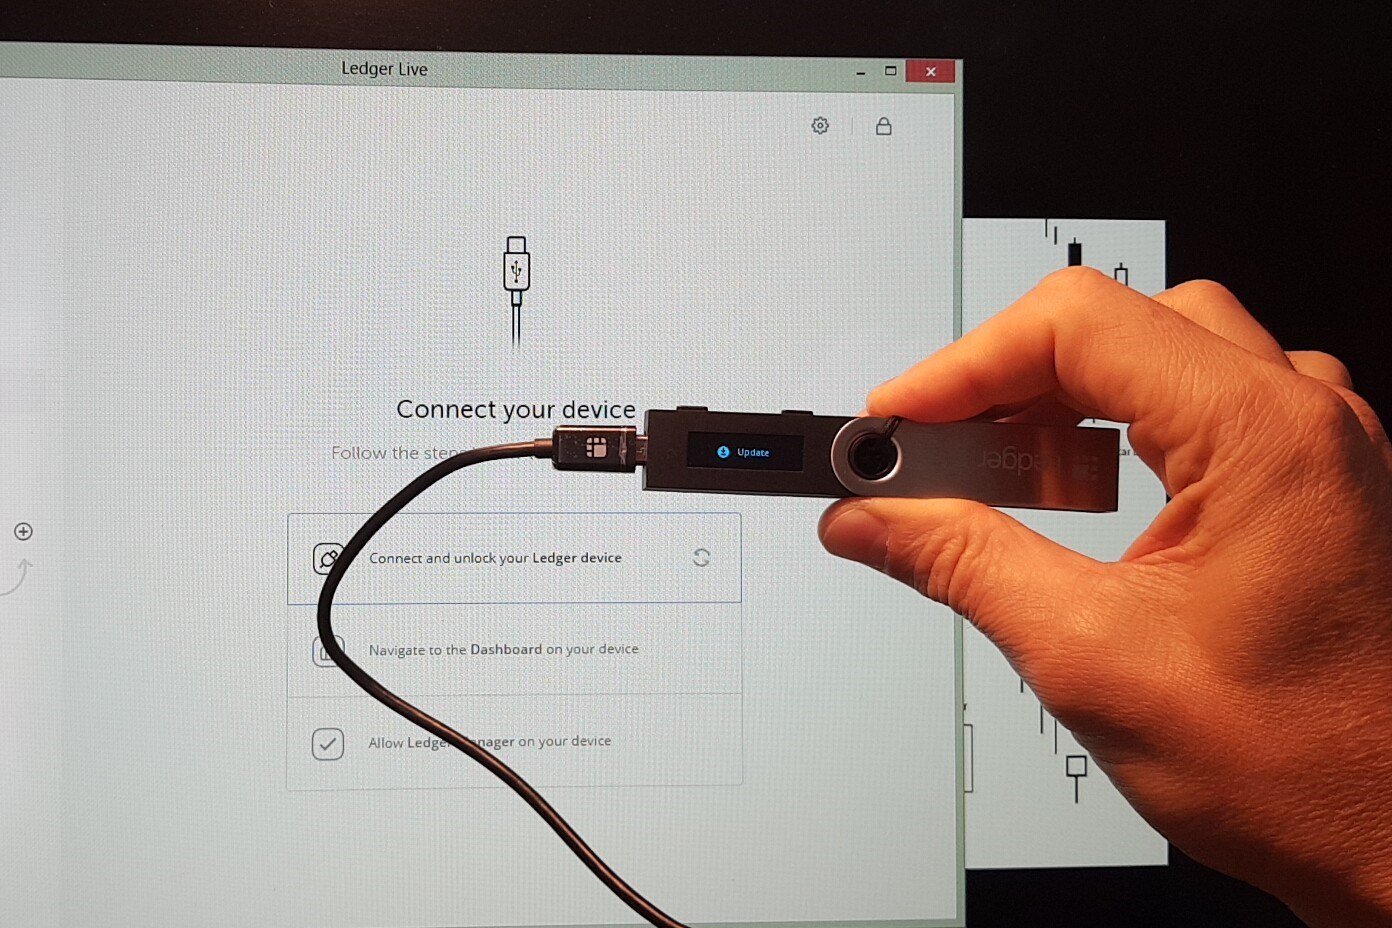 How To Disconnect My Ledger Nano S